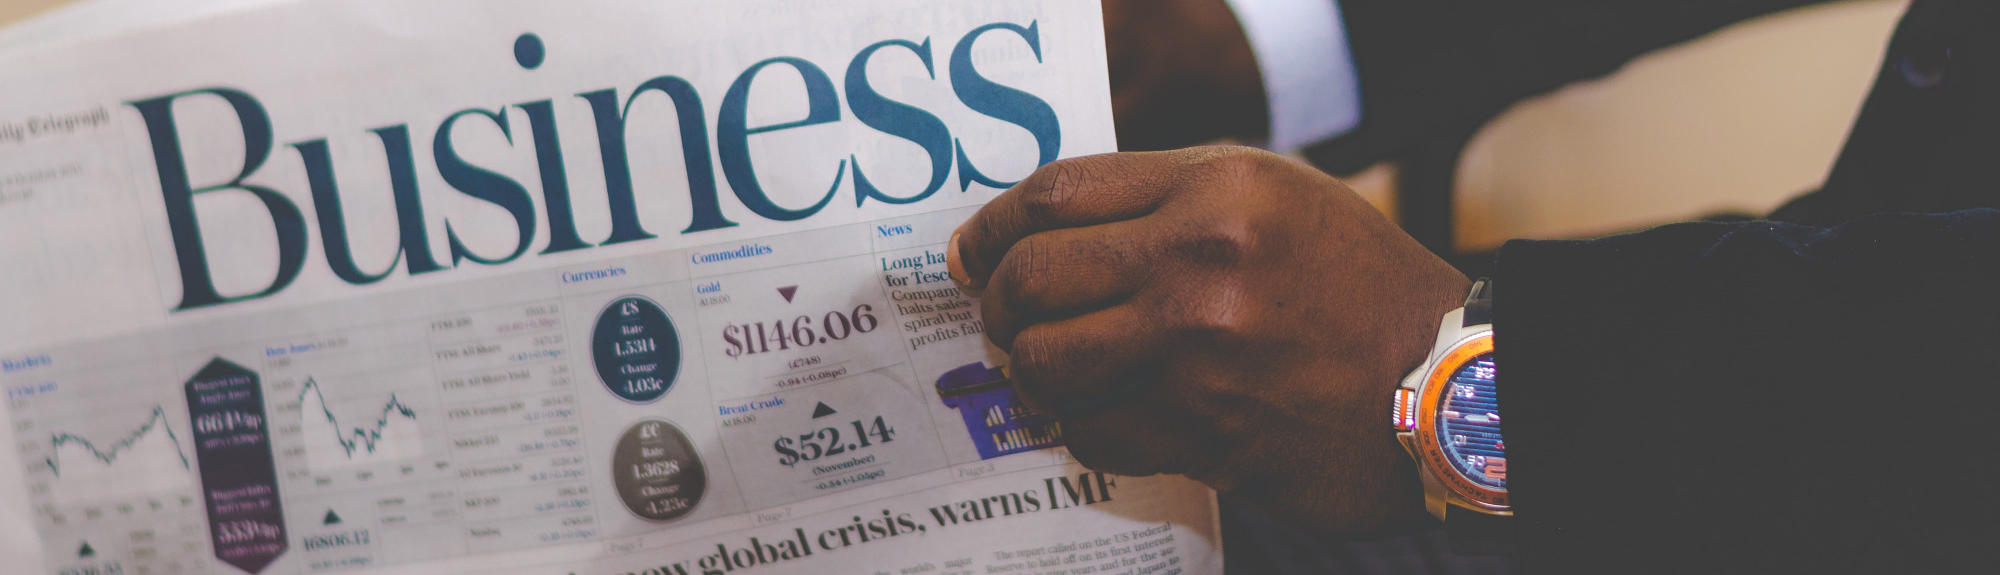 Stock photo of the business section of a newspaper